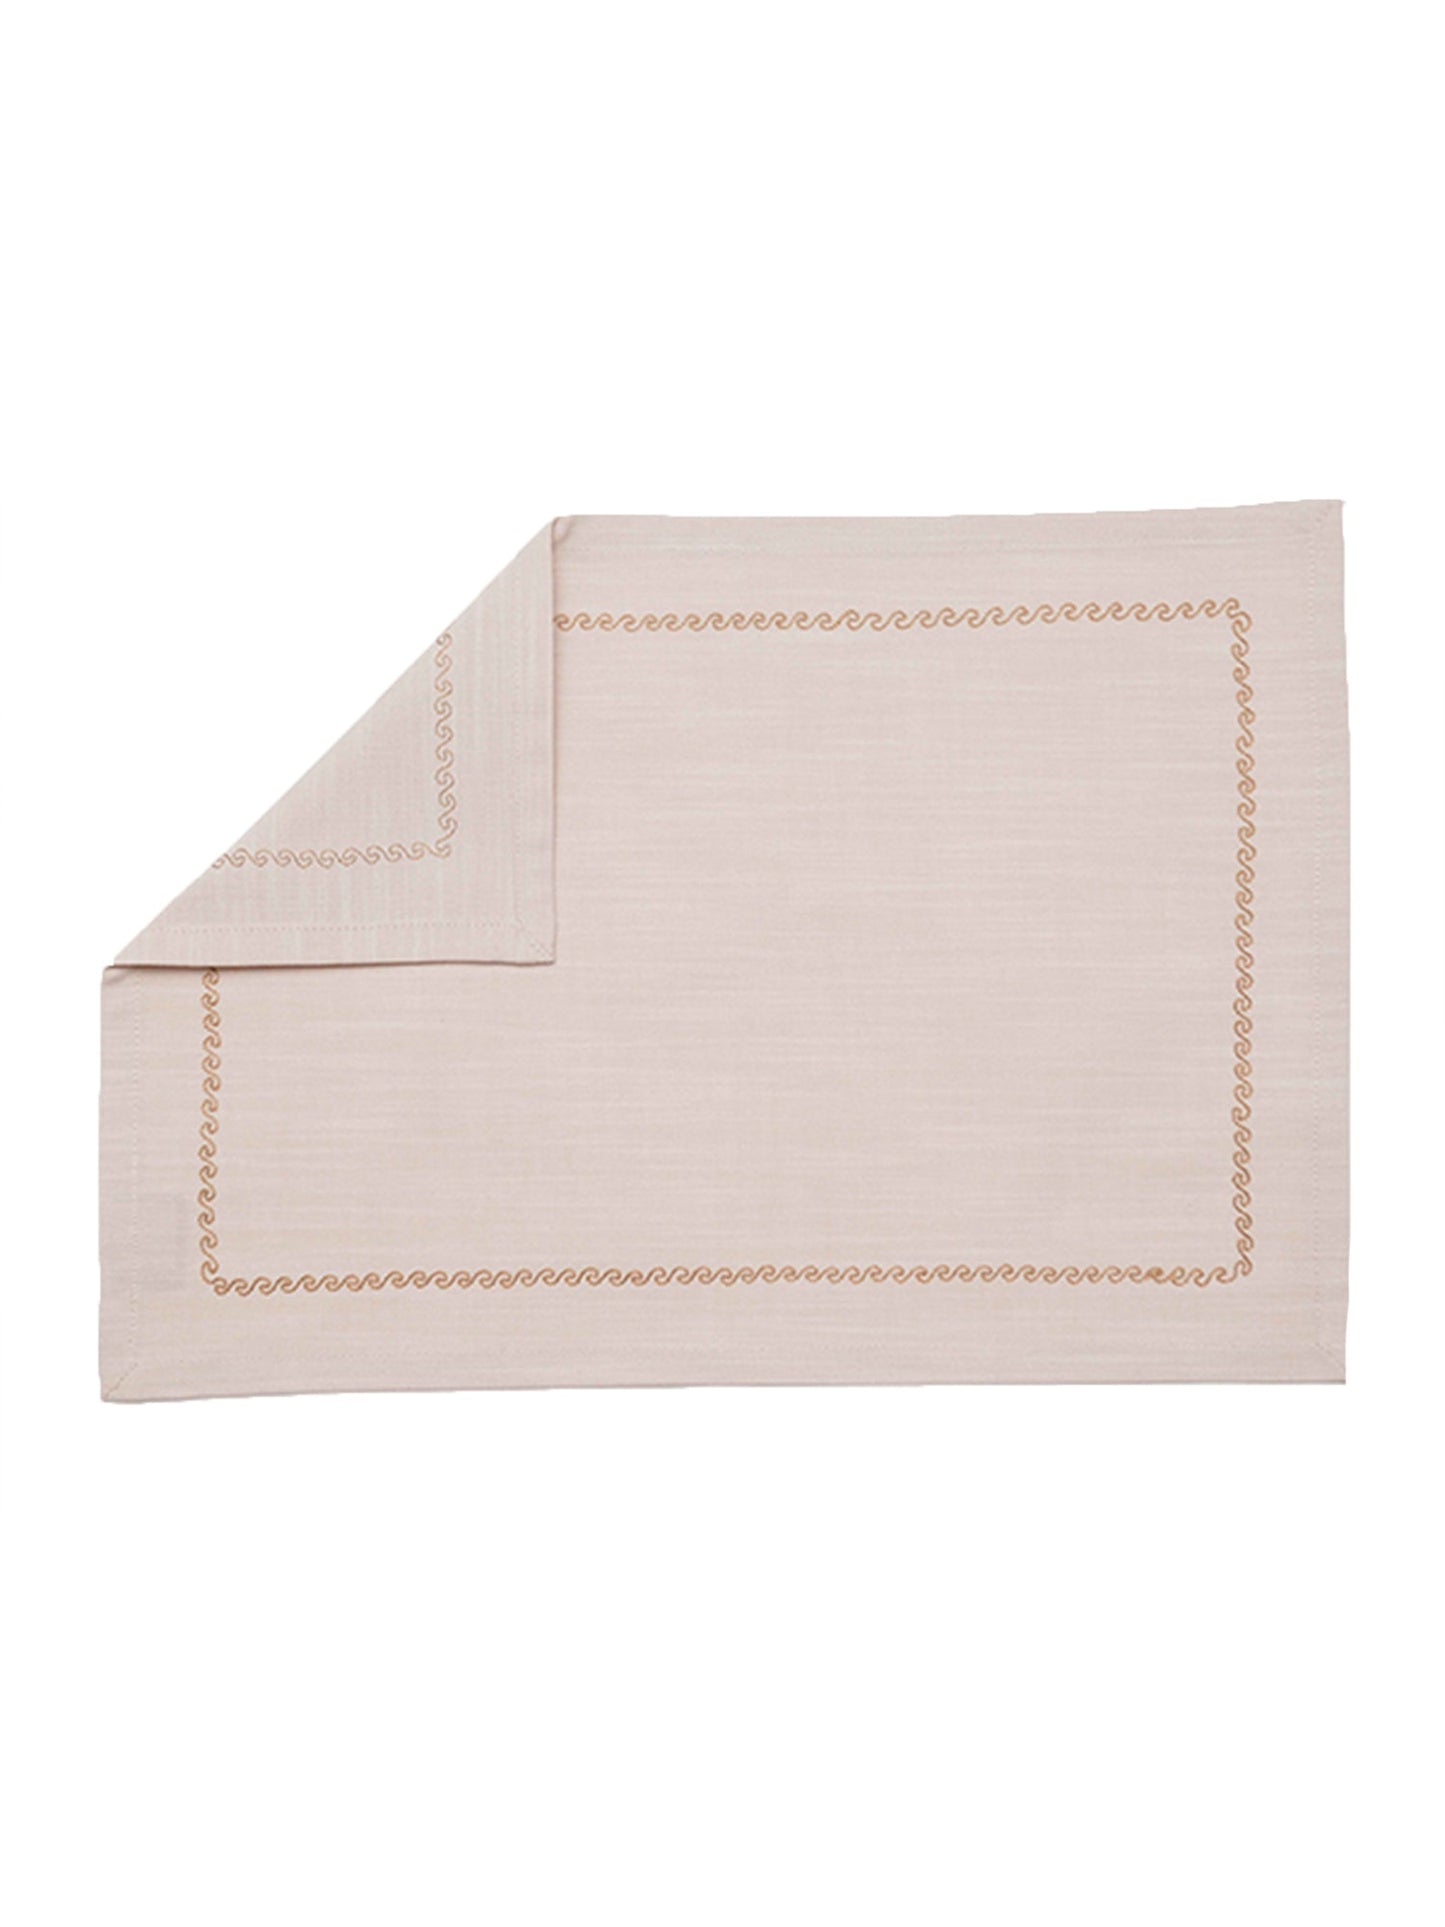 Table Mats and Napkins  Cotton Embroidered Off-White and Light Beige - 13" x 19" ; 16" x 16" - Set of 6